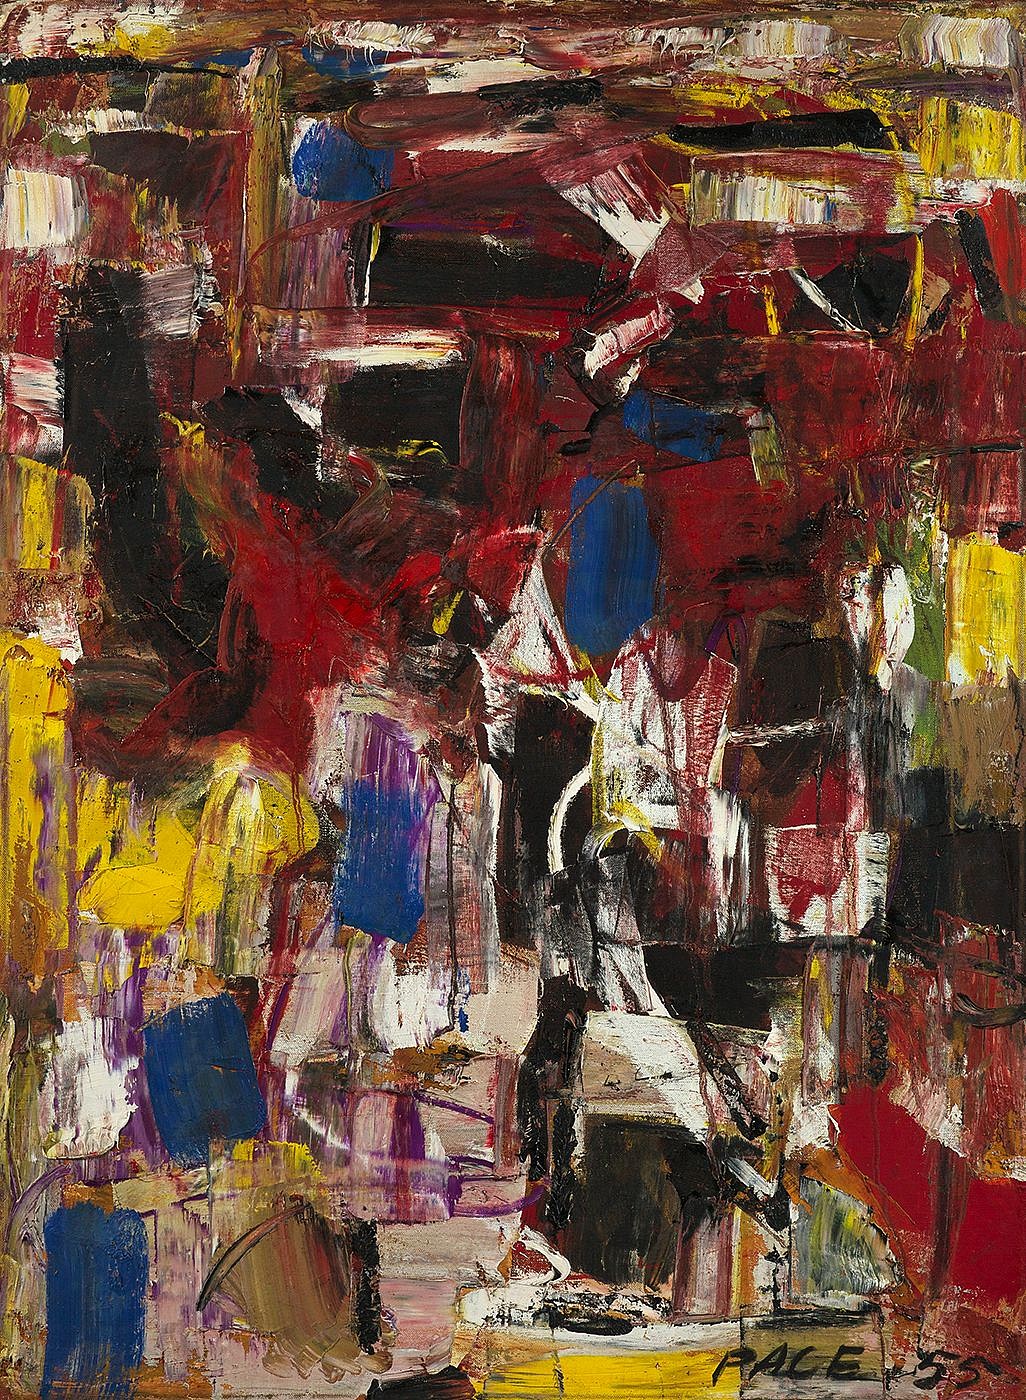 Info: Stephen Pace: Abstract Expressionist, Oct 16 - Nov 15, 2014